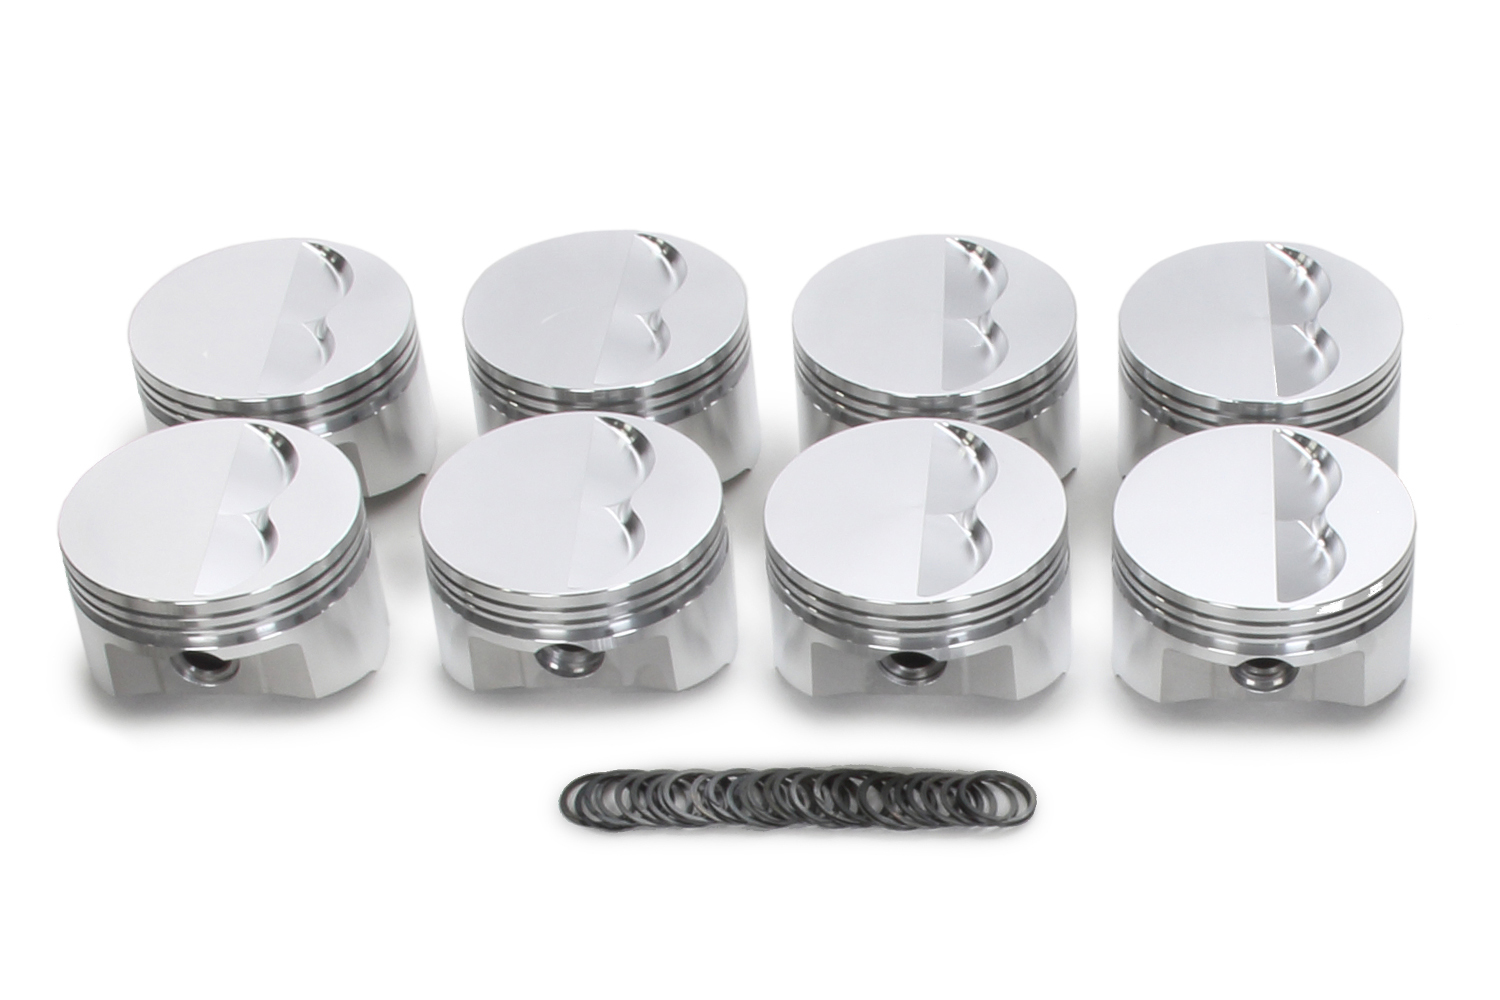 SRP Pistons 138087 Piston, 350 Flat Top, Forged, 4.060 in Bore, 1/16 x 1/16 x 3/16 in Ring Grooves, Minus 5.00 cc, Small Block Chevy, Set of 8